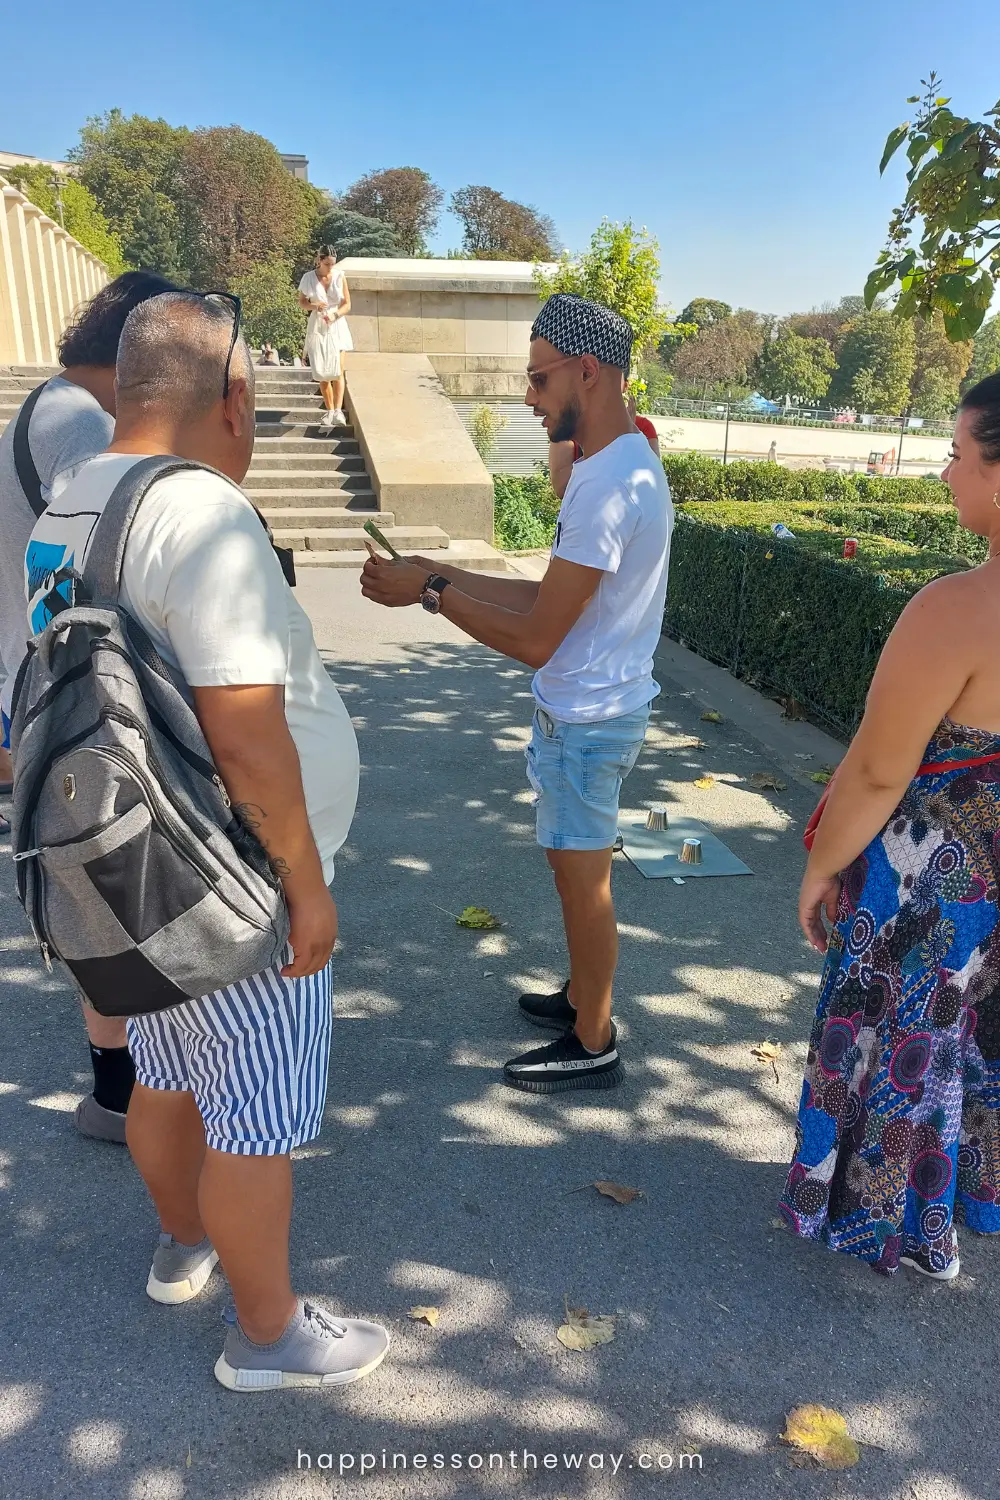 A man in a white shirt and patterned cap is engaging with onlookers in a classic ball and cups guessing game known as shell game or thimblerig scam on the Trocadéro esplanade in Paris.